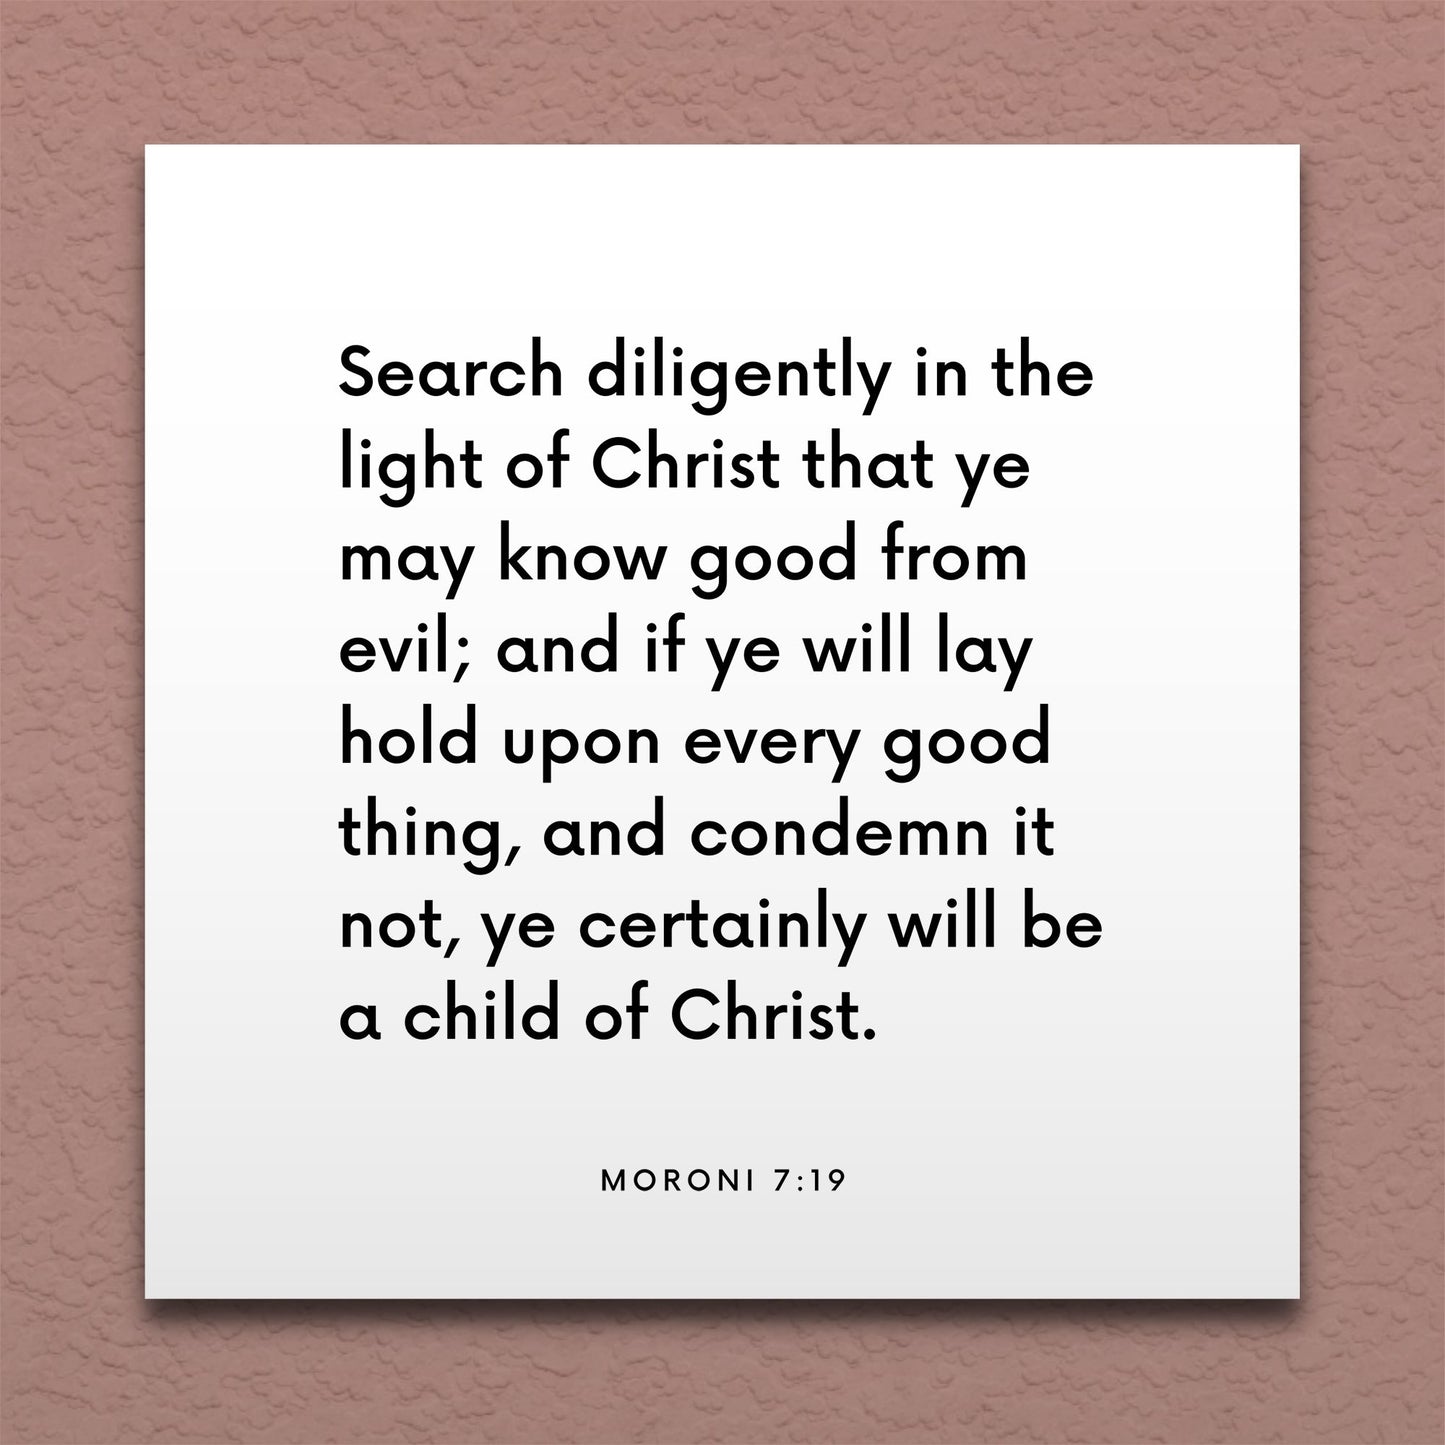 Wall-mounted scripture tile for Moroni 7:19 - "Search diligently in the light of Christ"